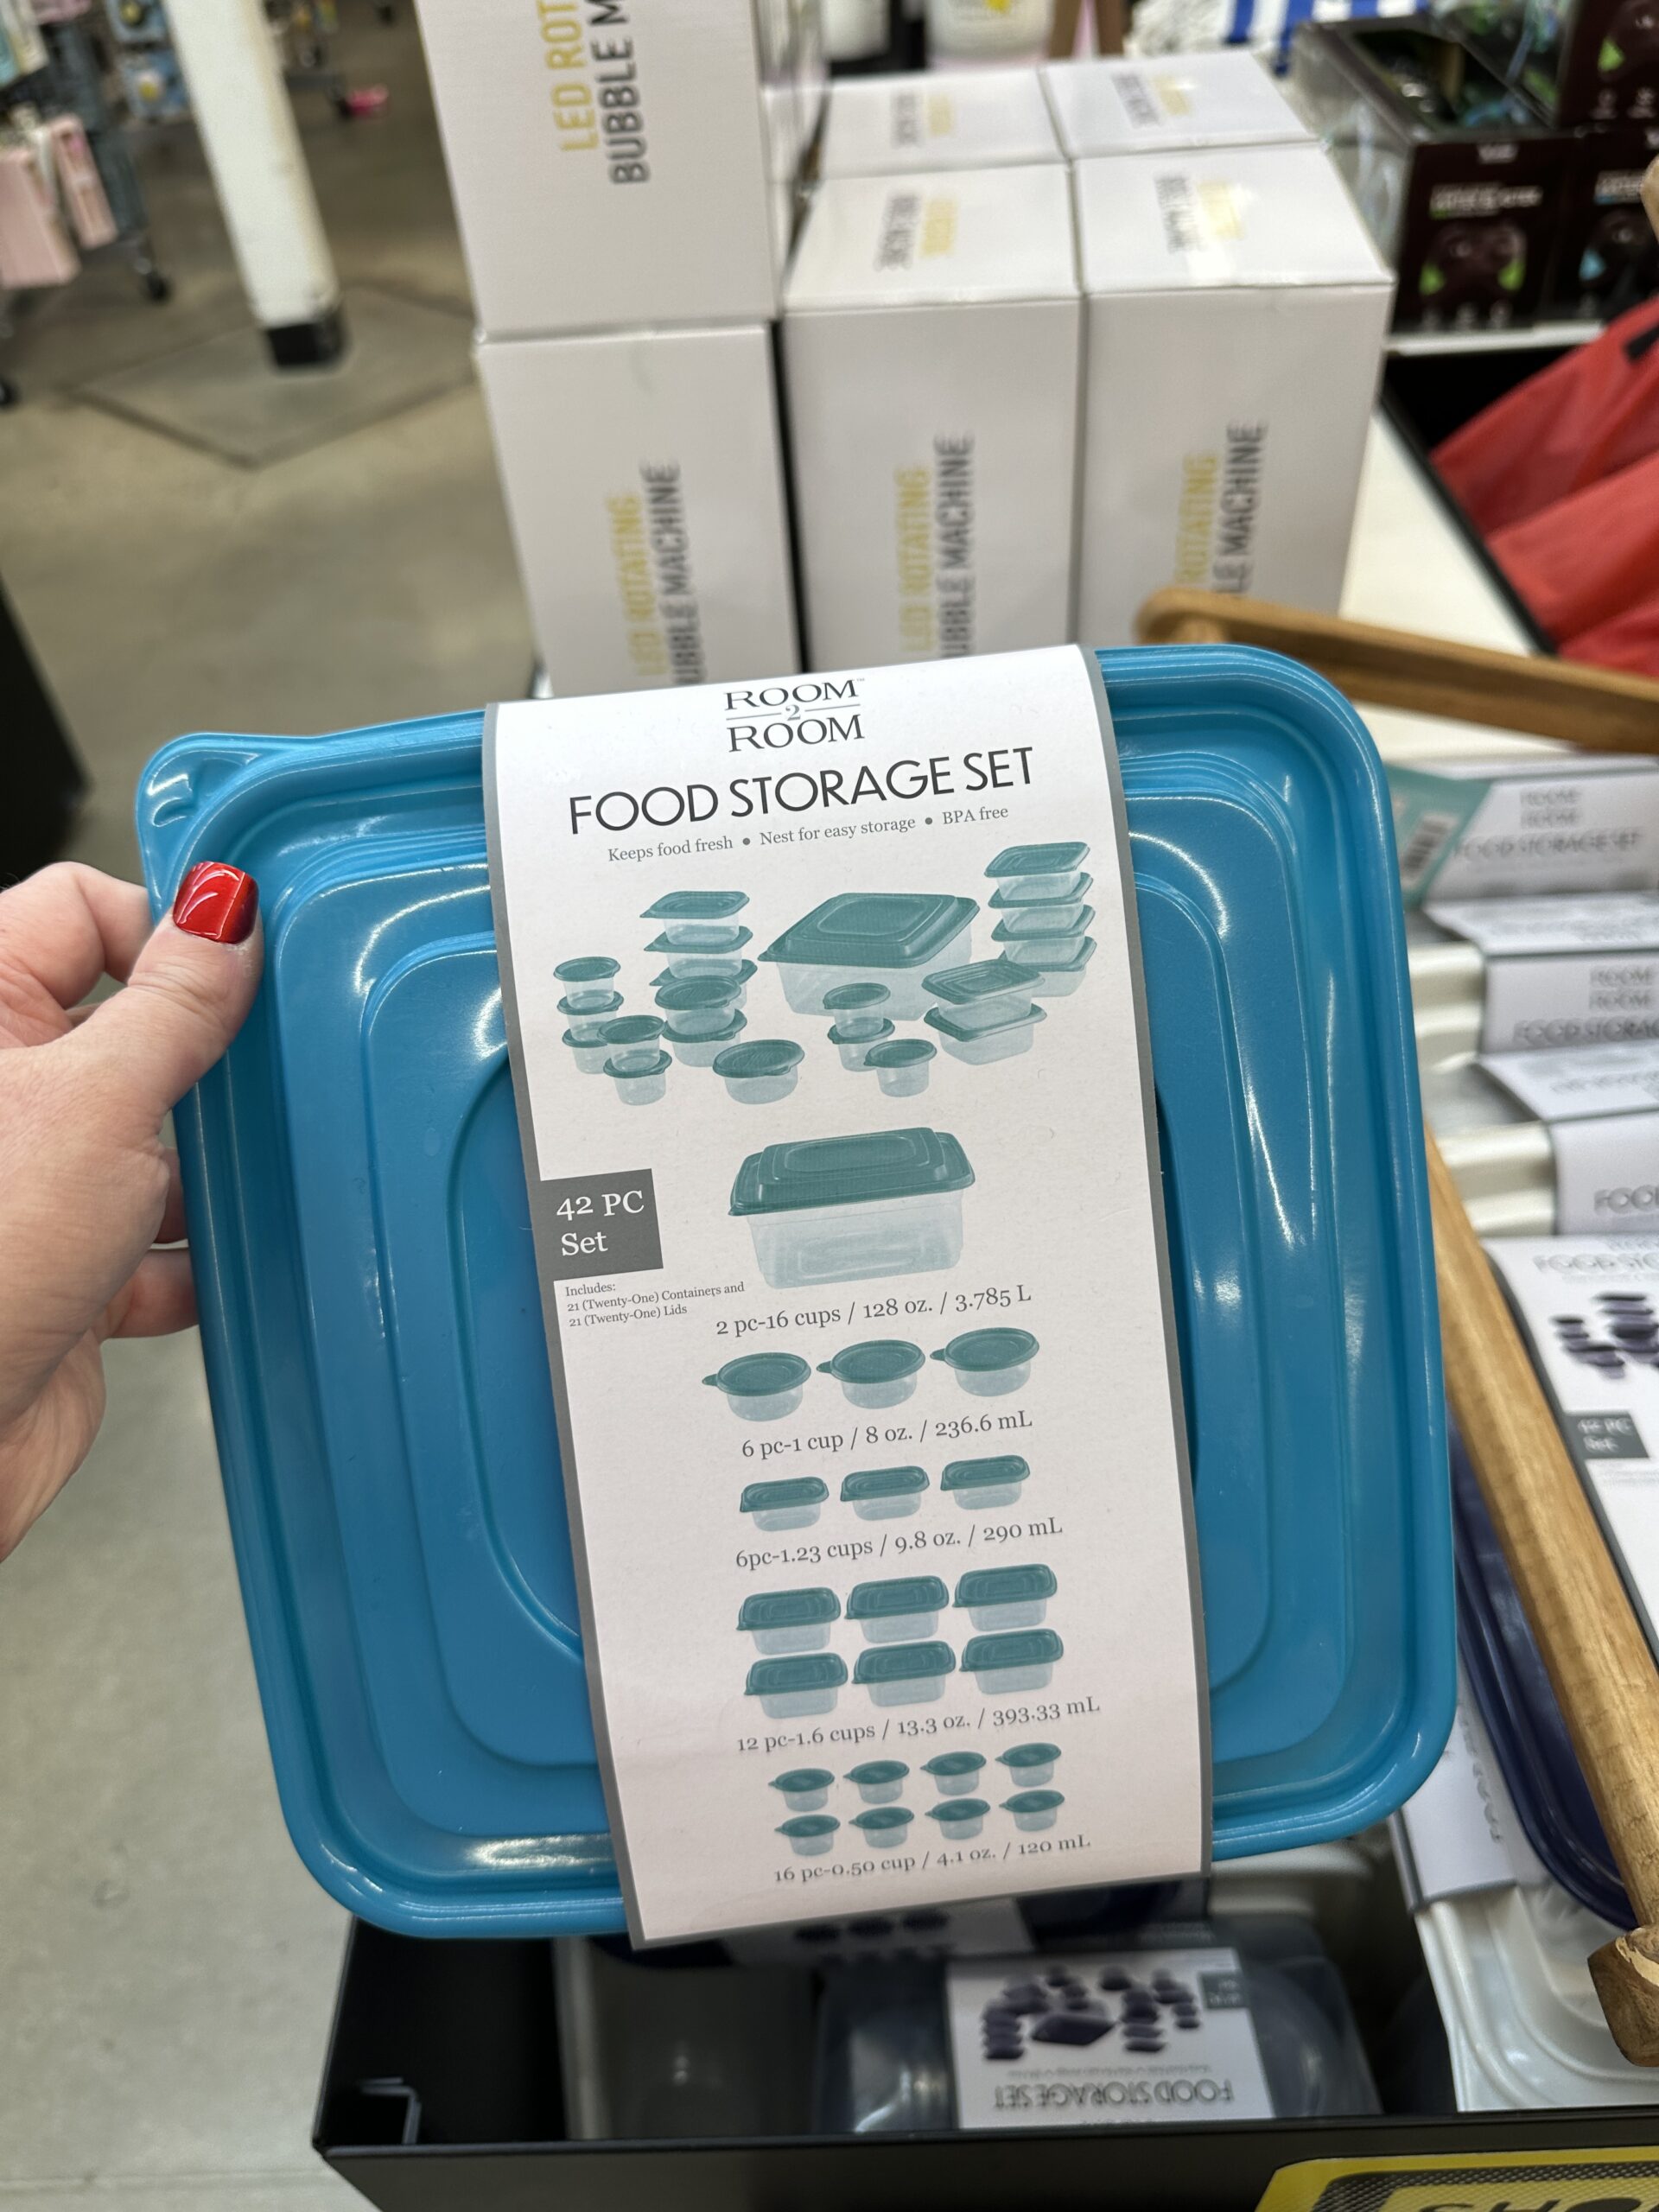 Food Storage Container Sets on Sale